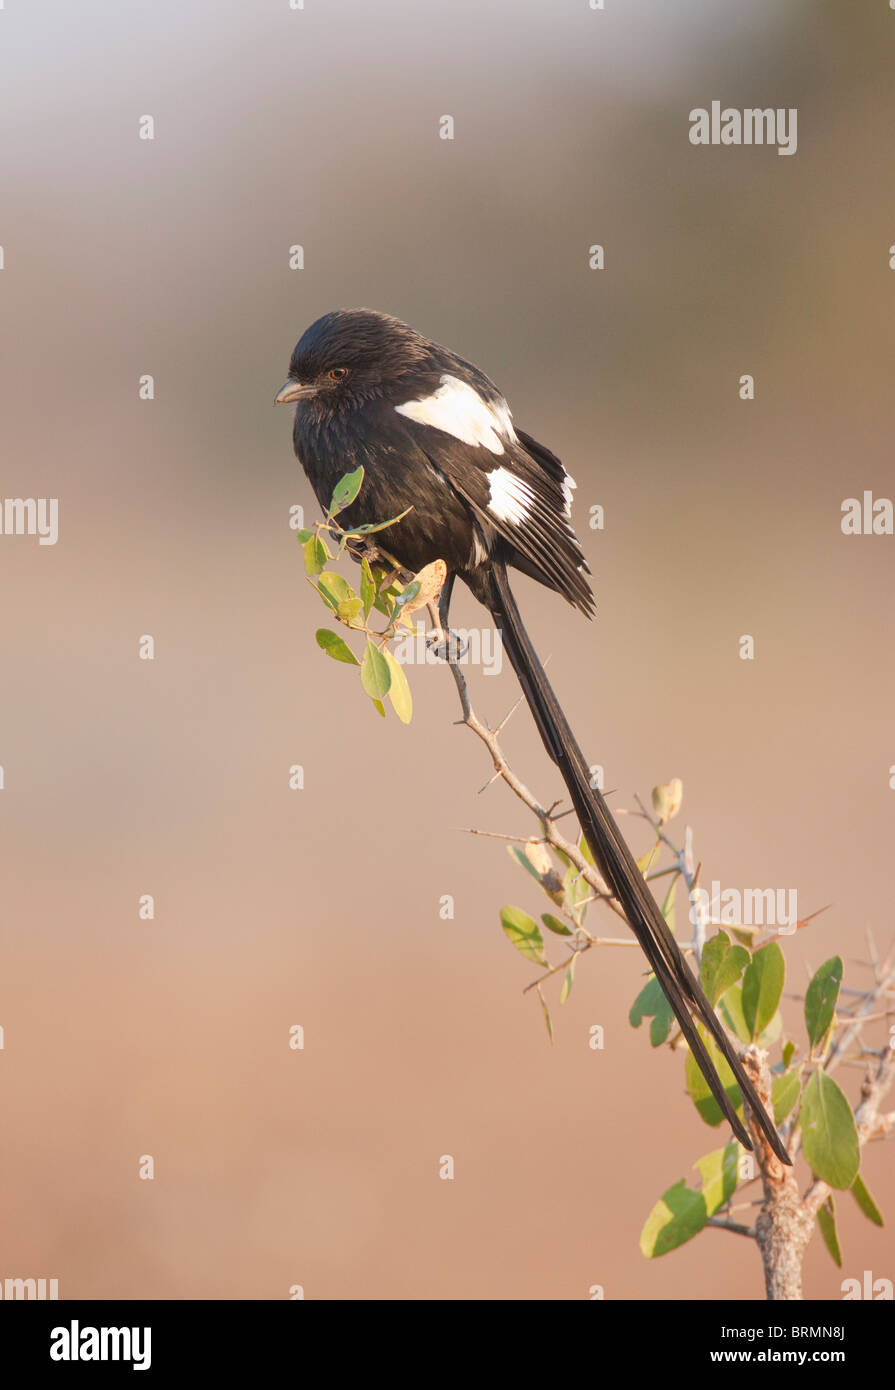 Magpie Shrike perched on branch with tree twigs Stock Photo